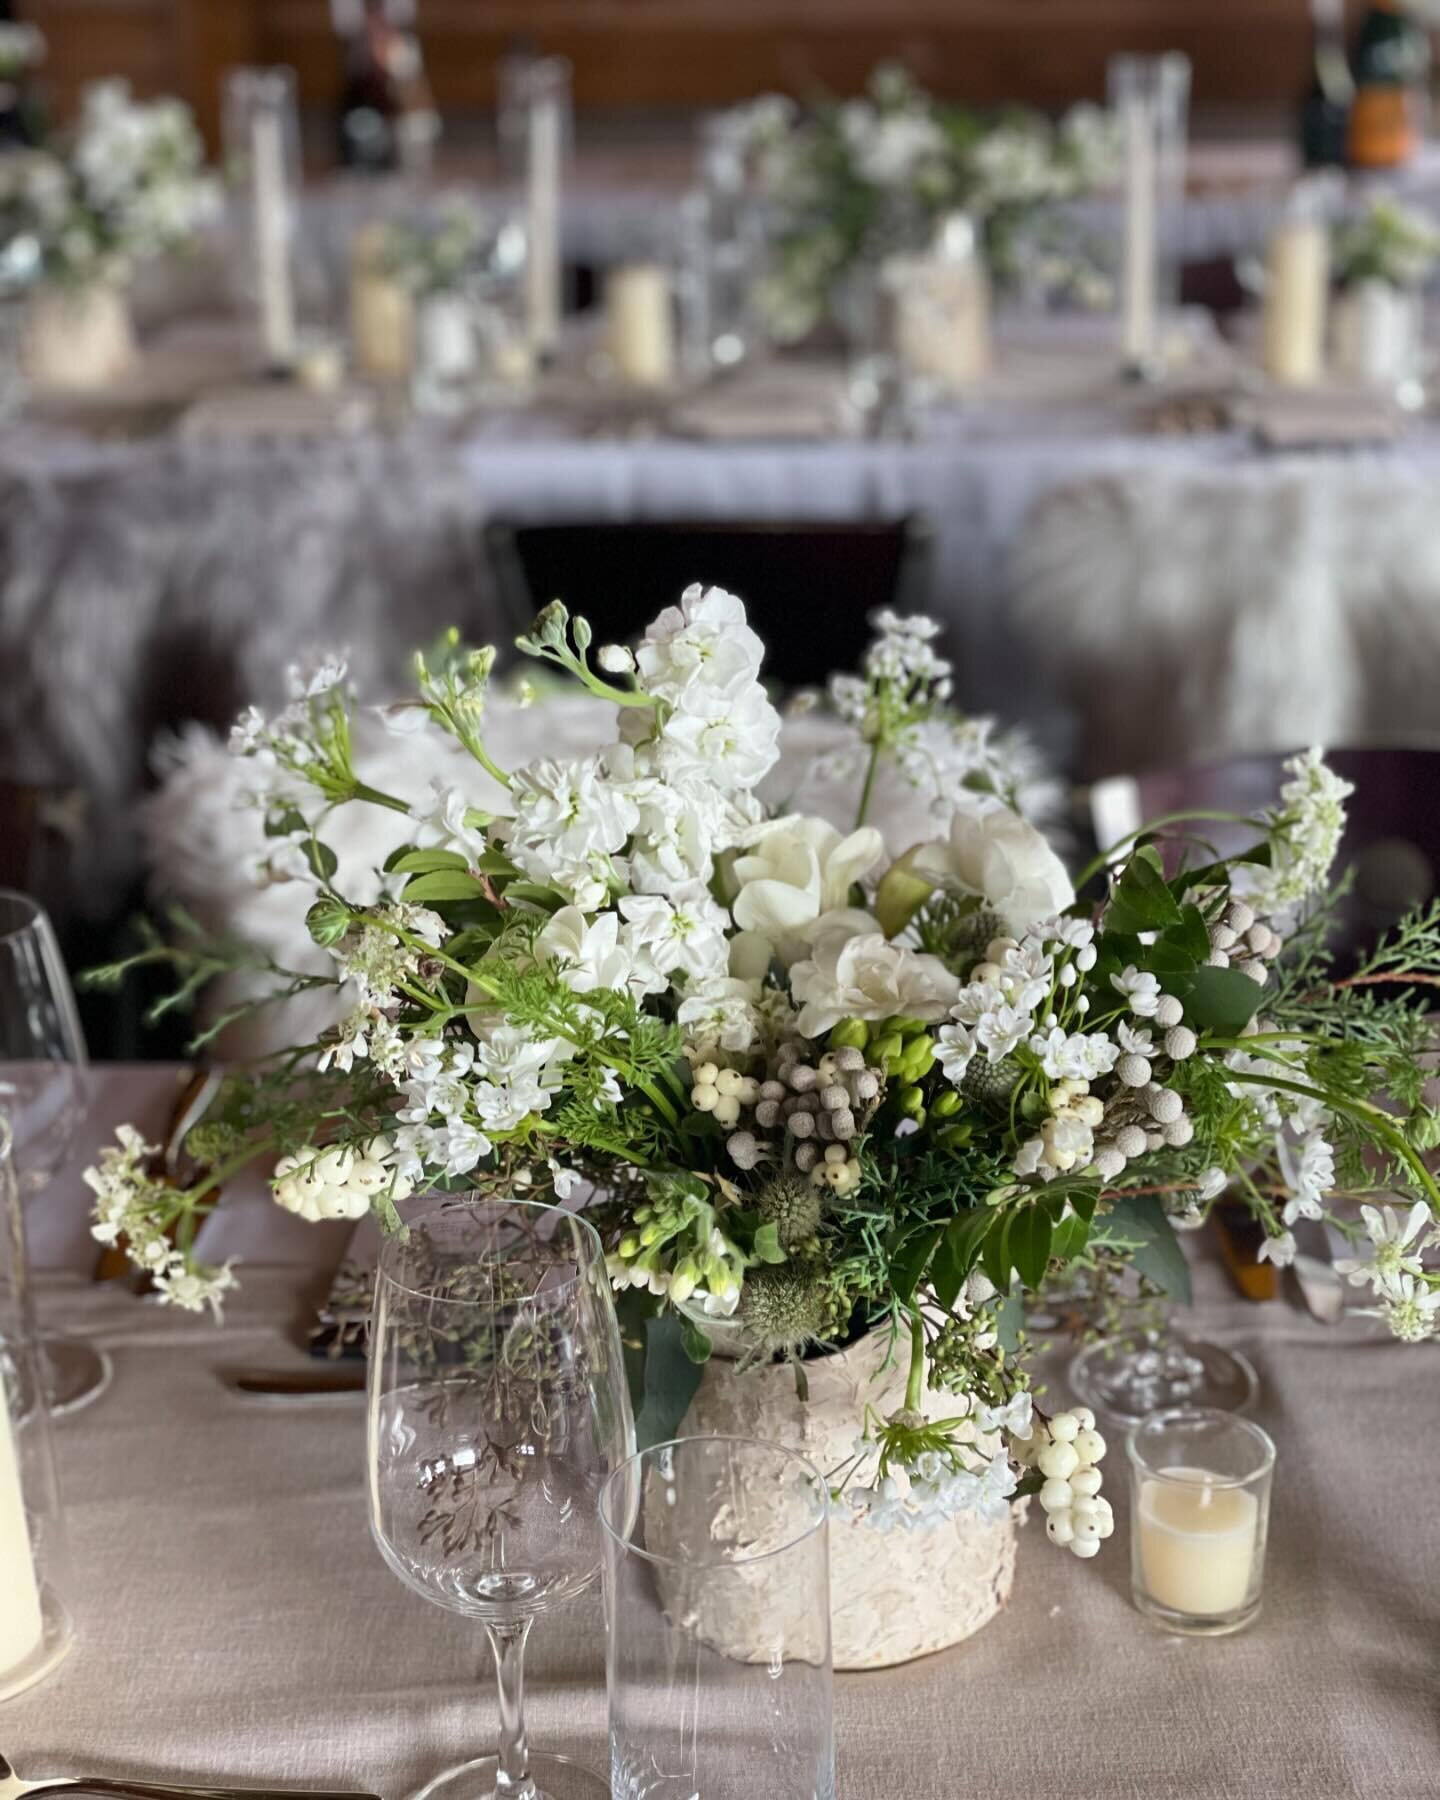 It was a beautiful evening for a night event at Cloud Nine !  Chic, elegant and neutral.  Lovely people, food, service!
@aspensnowmass @aspensnowmassweddings 
@mountainflowersofaspen 
@djsavi 
@jcuret 
@wendyblakeslee_events 
@aspenhighlands